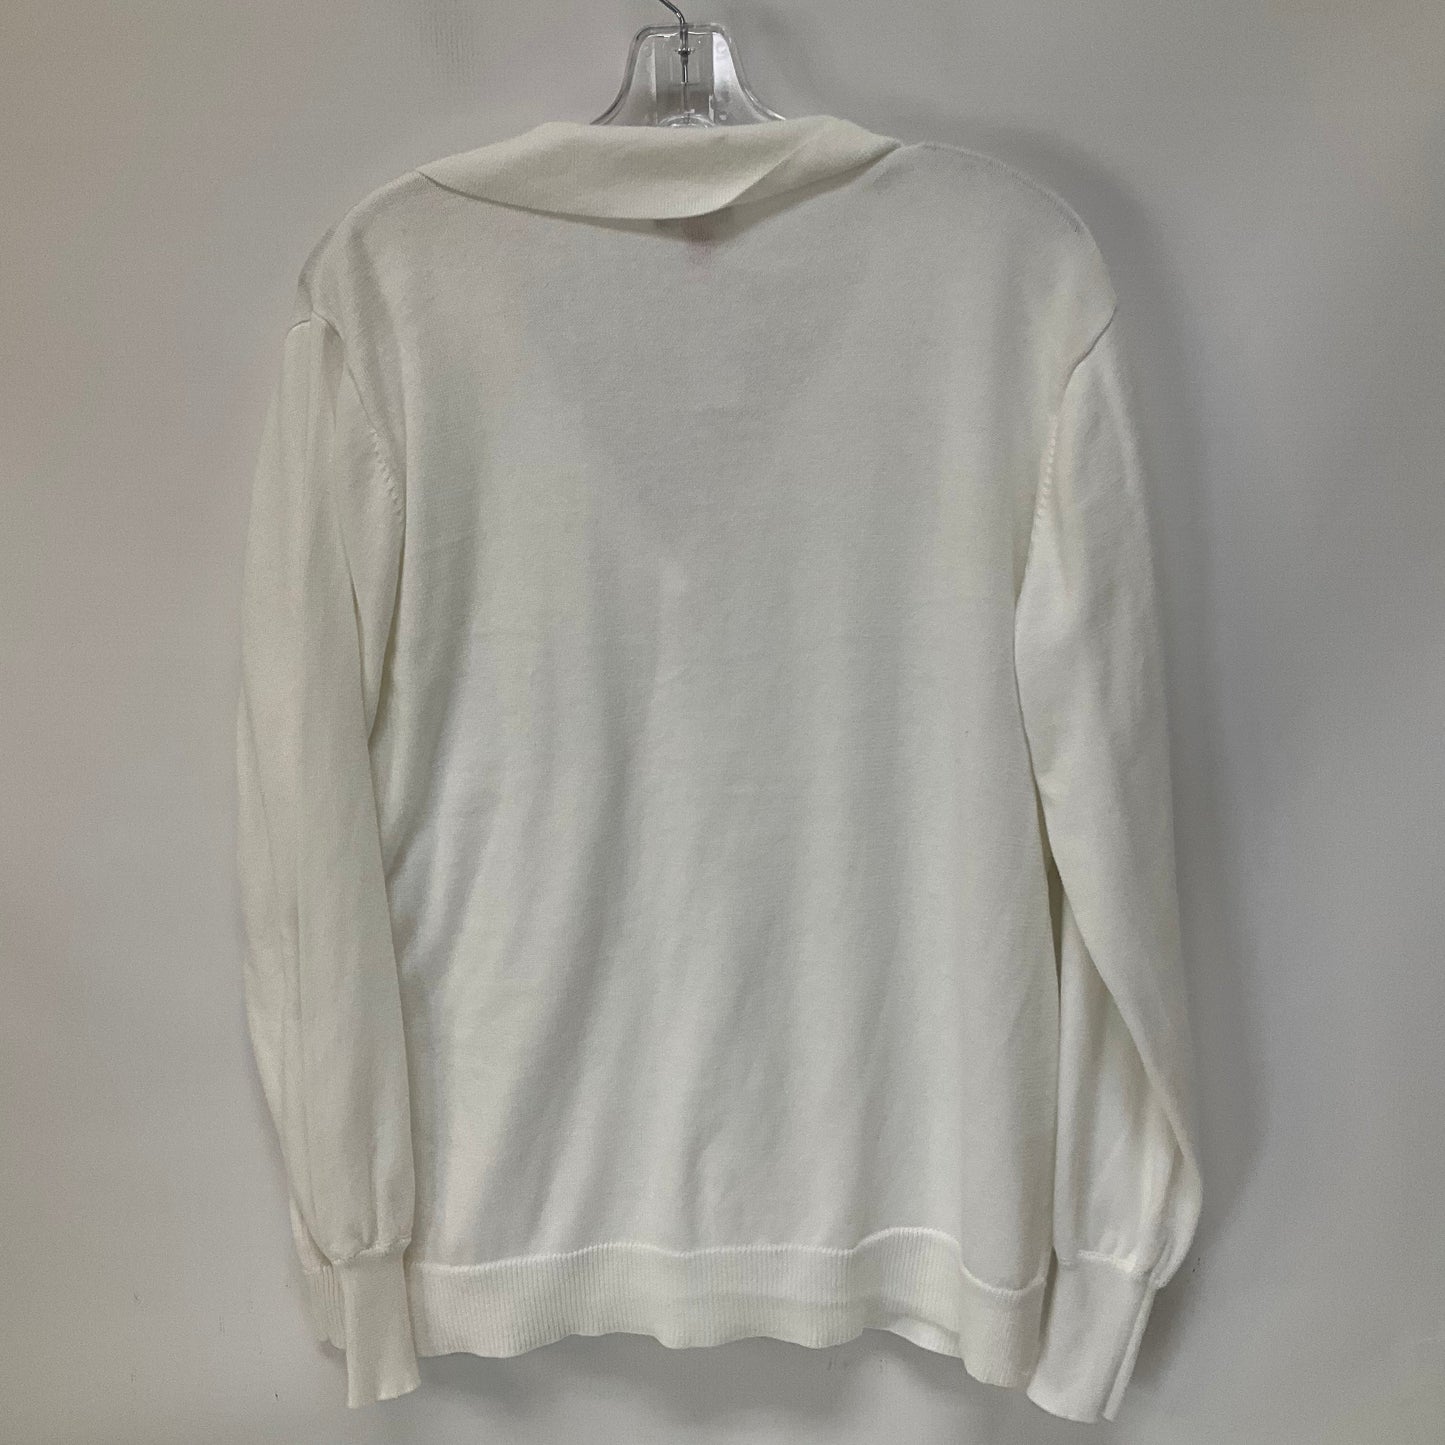 White Top Long Sleeve Vince Camuto, Size M